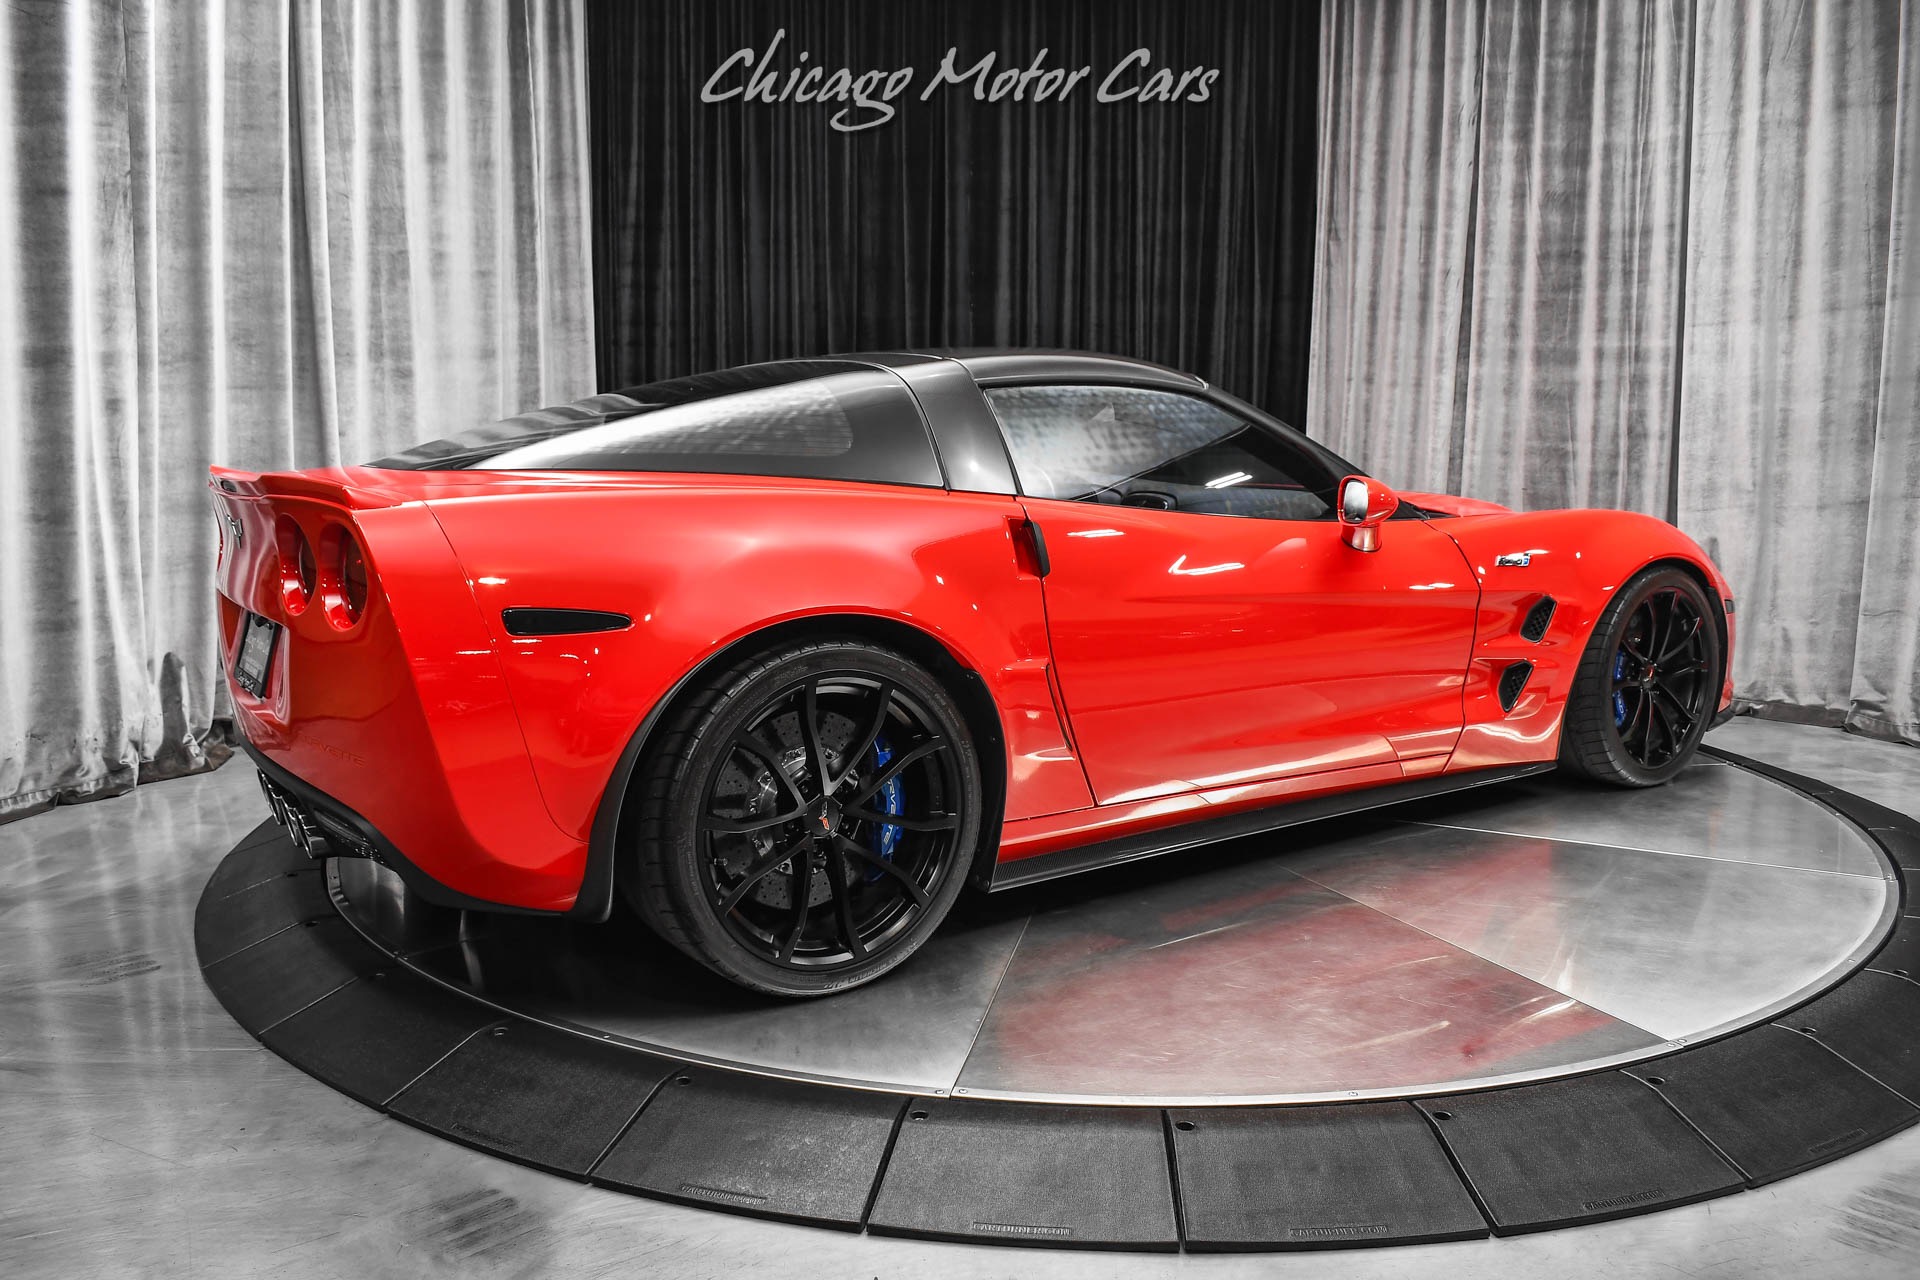 Used 2010 Chevrolet Corvette ZR1 3ZR ONLY 9K MILES RARE Torch Red 